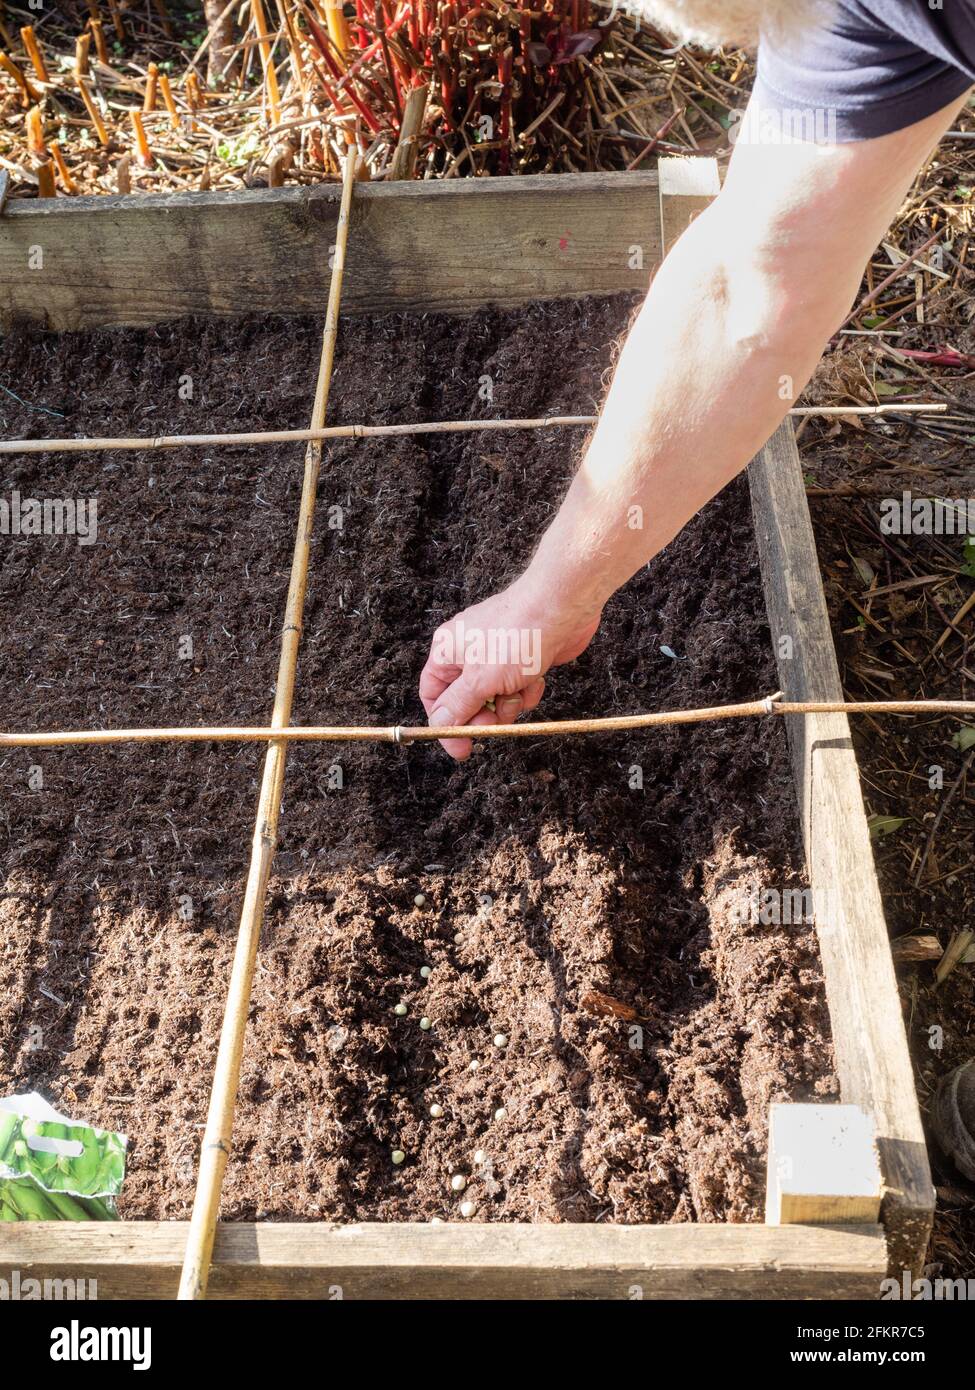 Early spring sowing of garden pea Pisum sativum 'Meteor' in a raised bed with canes for square foot spacing Stock Photo